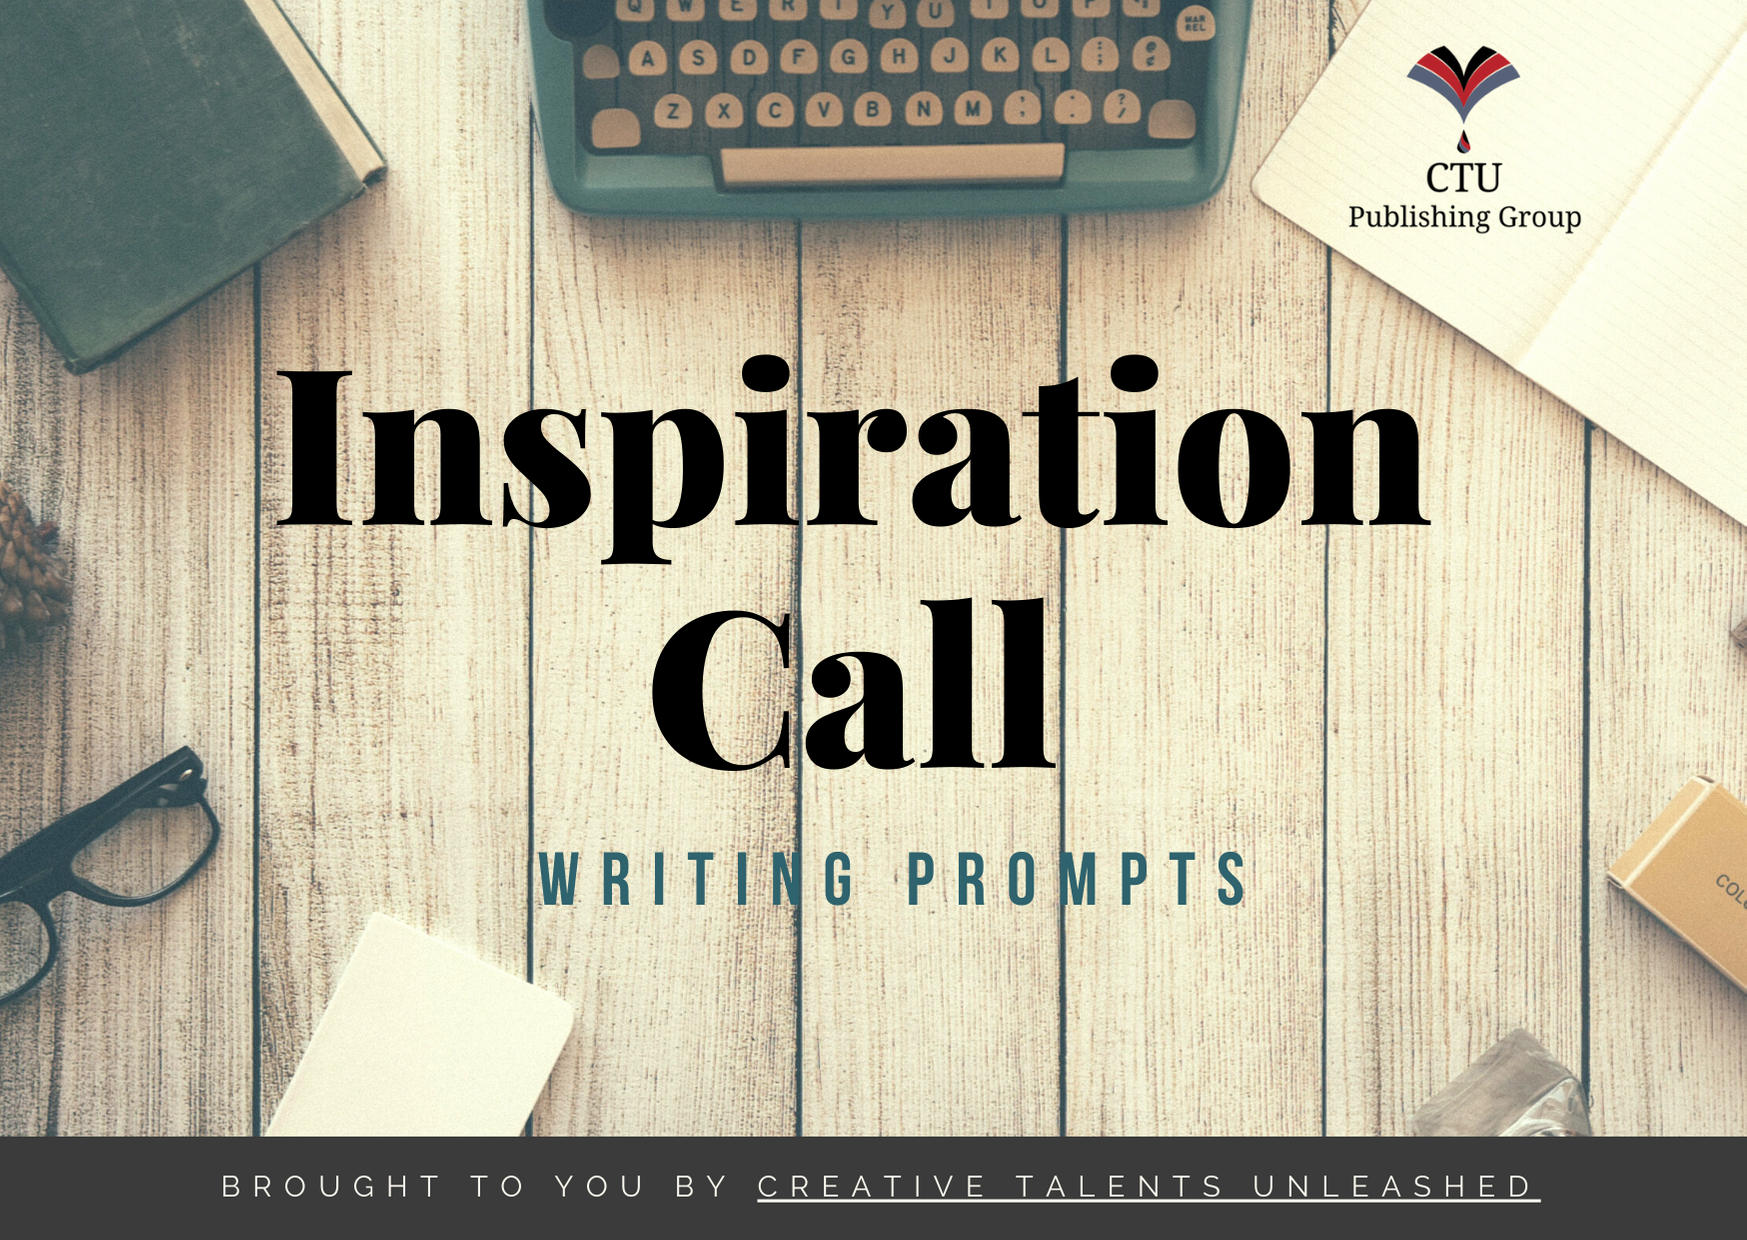 Inspiration Call: Week 22 May 2020 Writing Prompts